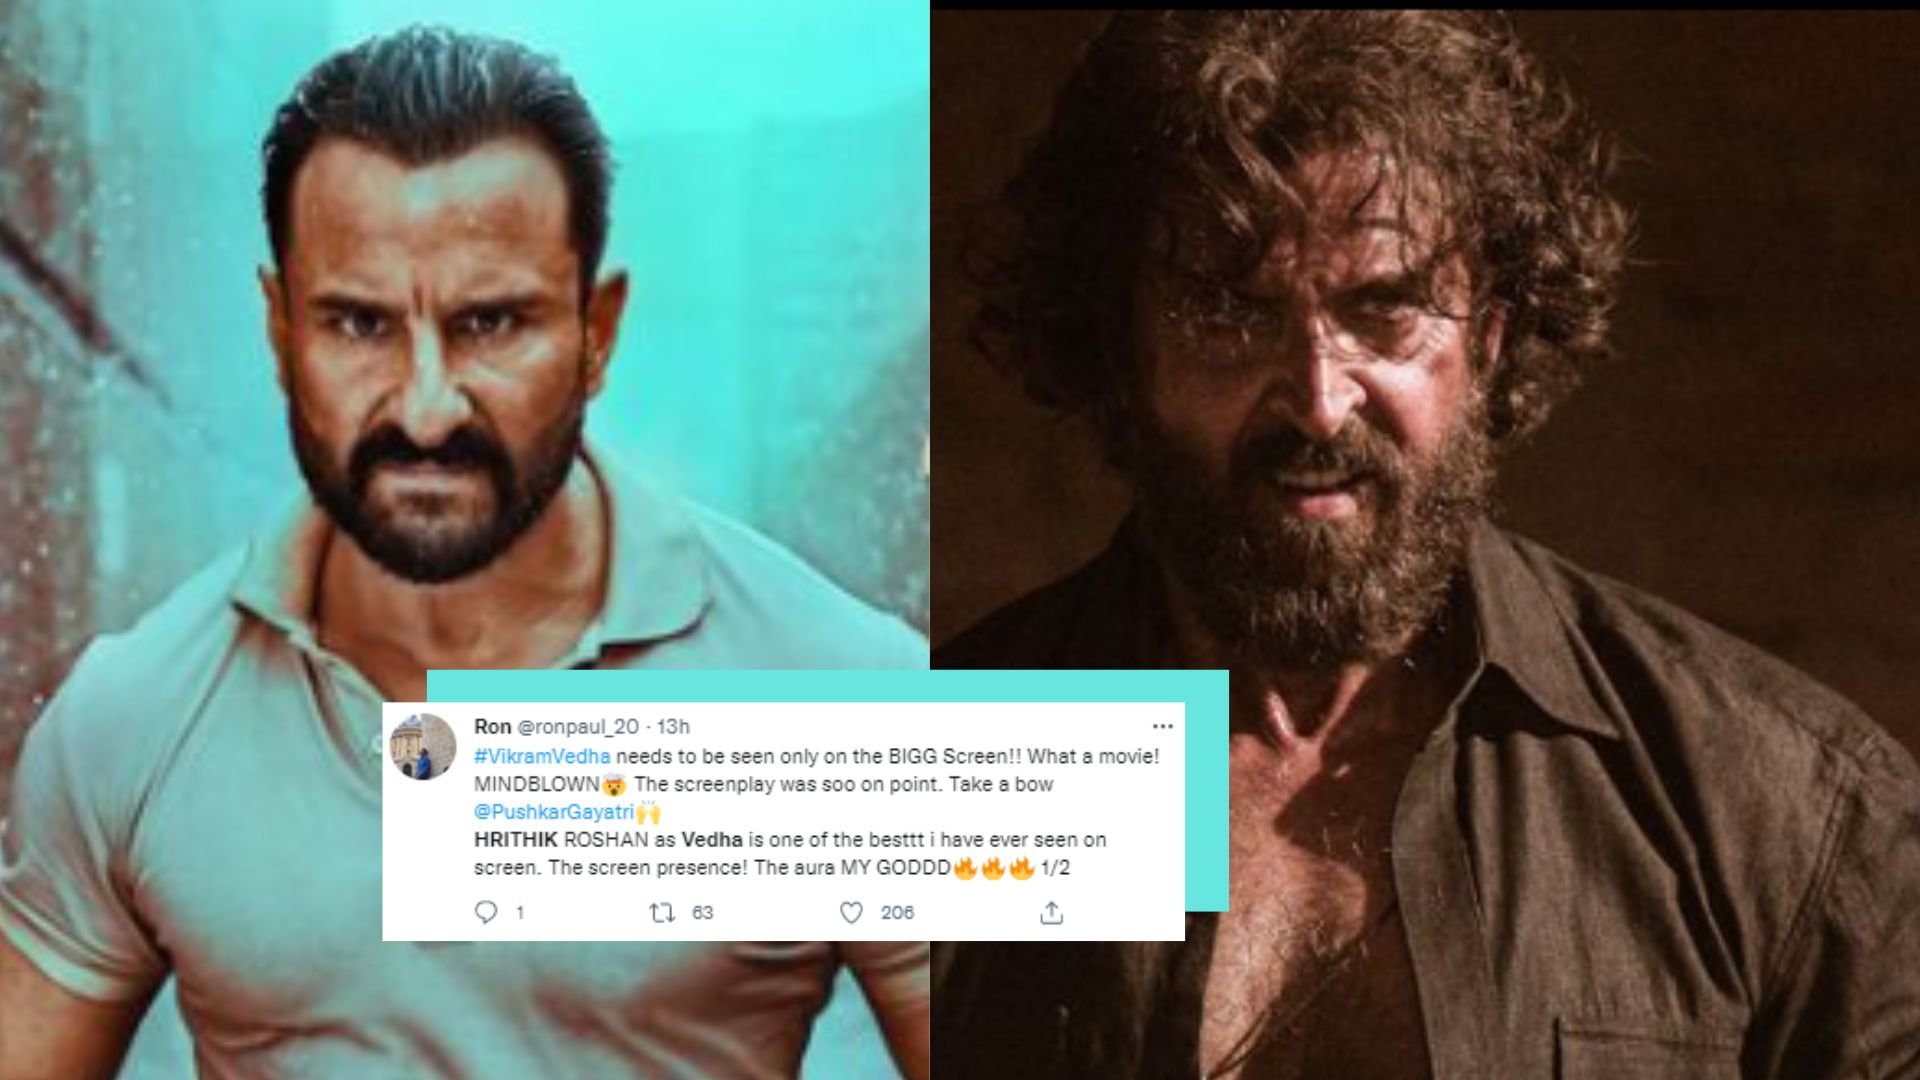 Twitter Reviews Of ‘Vikram Vedha’ Are Collectively Simping Over Hrithik Roshan. Totally Understandable!